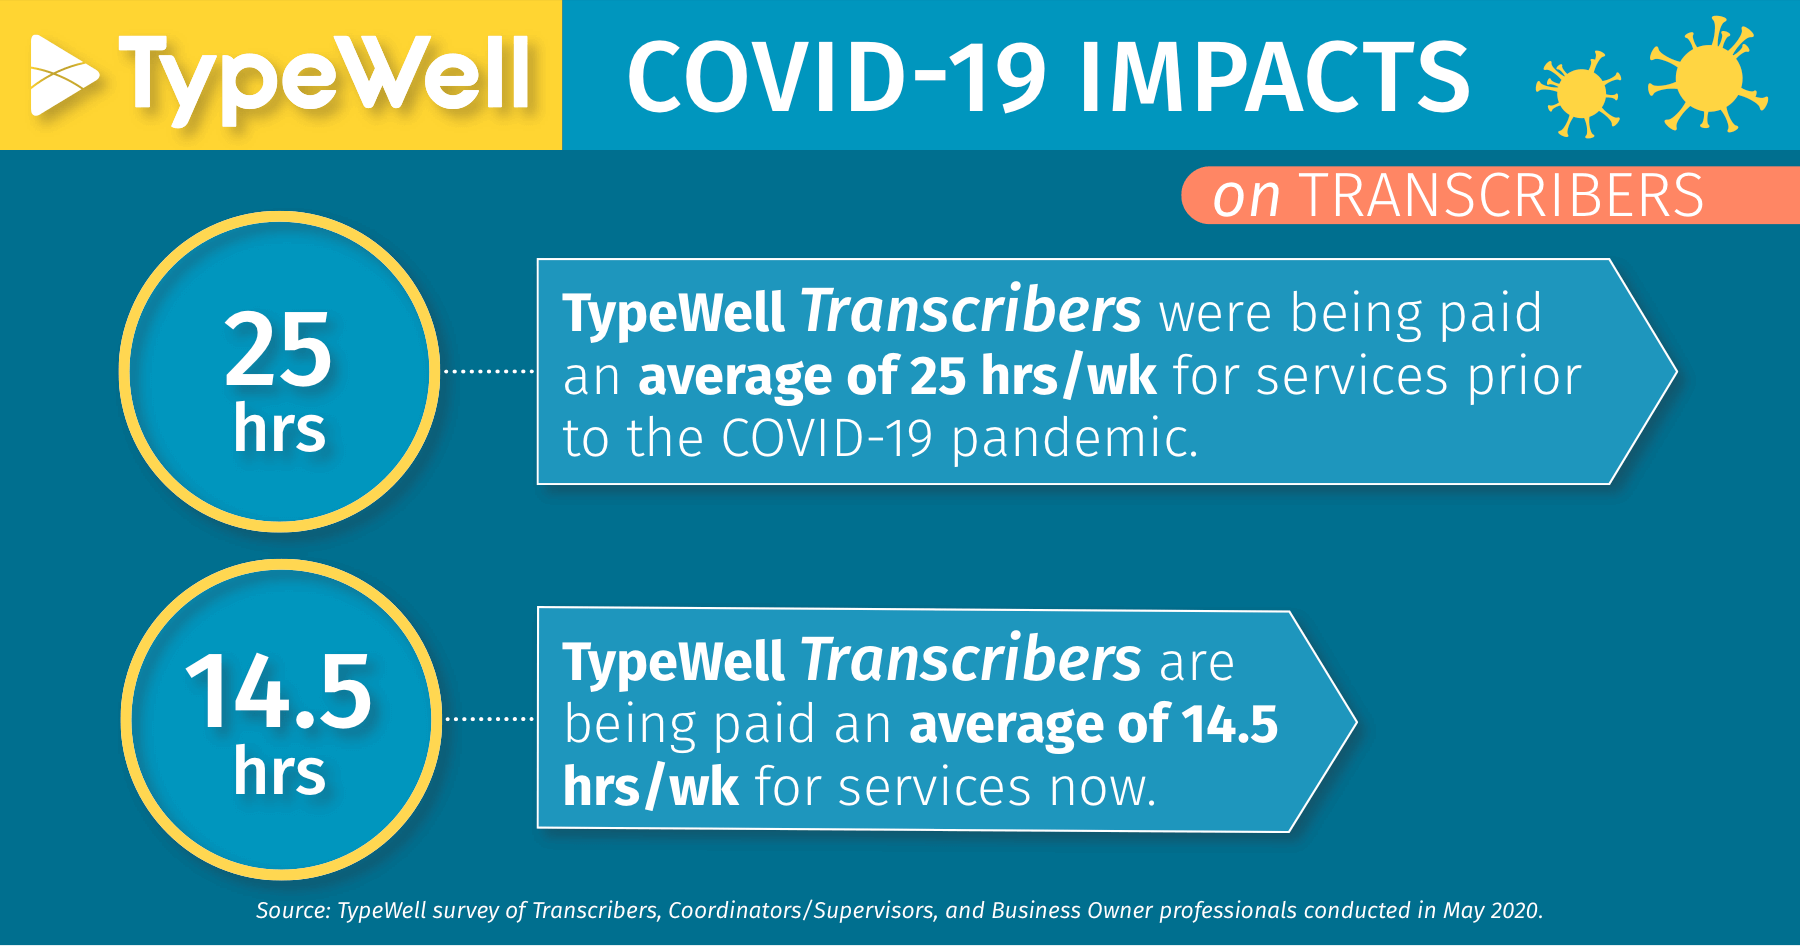 COVID-19 impacts on transcribers: average 14.5 hours/week for TypeWell services, down from 25 hours/week before the pandemic.